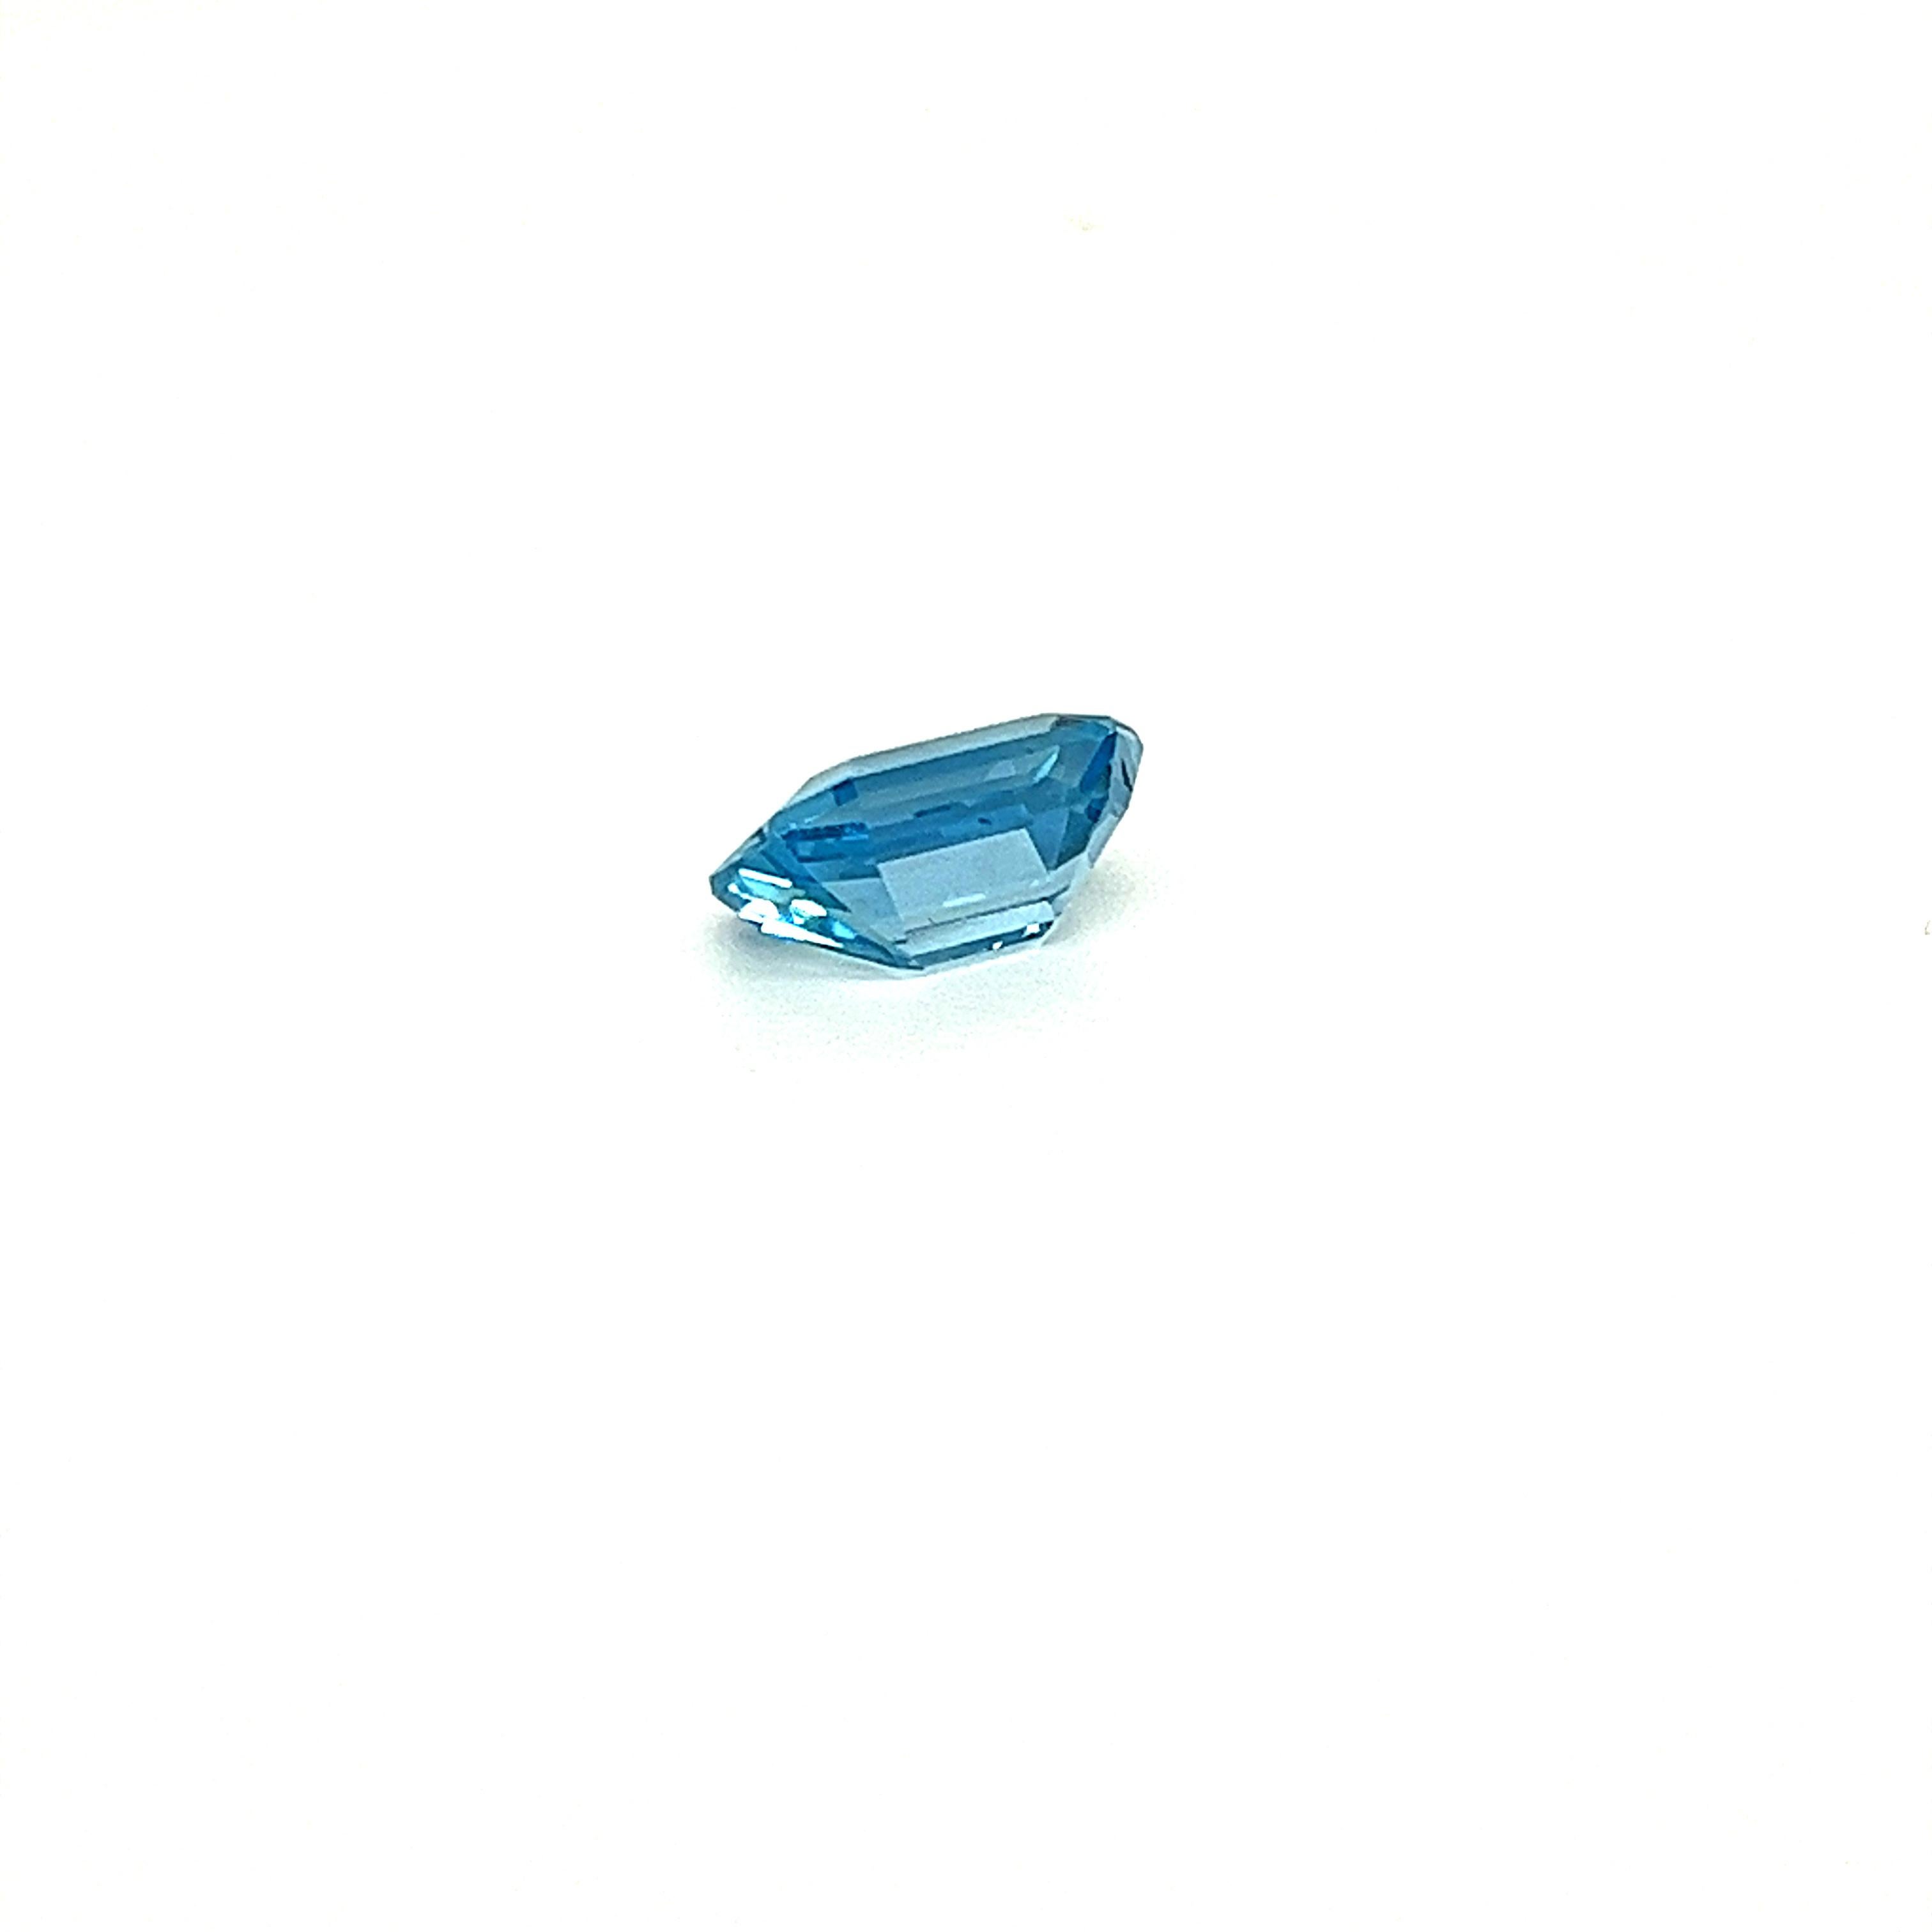 Aquamarine Emerlad  cut stone weighing a total of  2.46 Carats, offered loose to create an unique design or a top piece for a garnet collector.

Dimension : 9.81 x 7.37

The stone is shiny with a sweet blue color, totally clean.

Each stone is